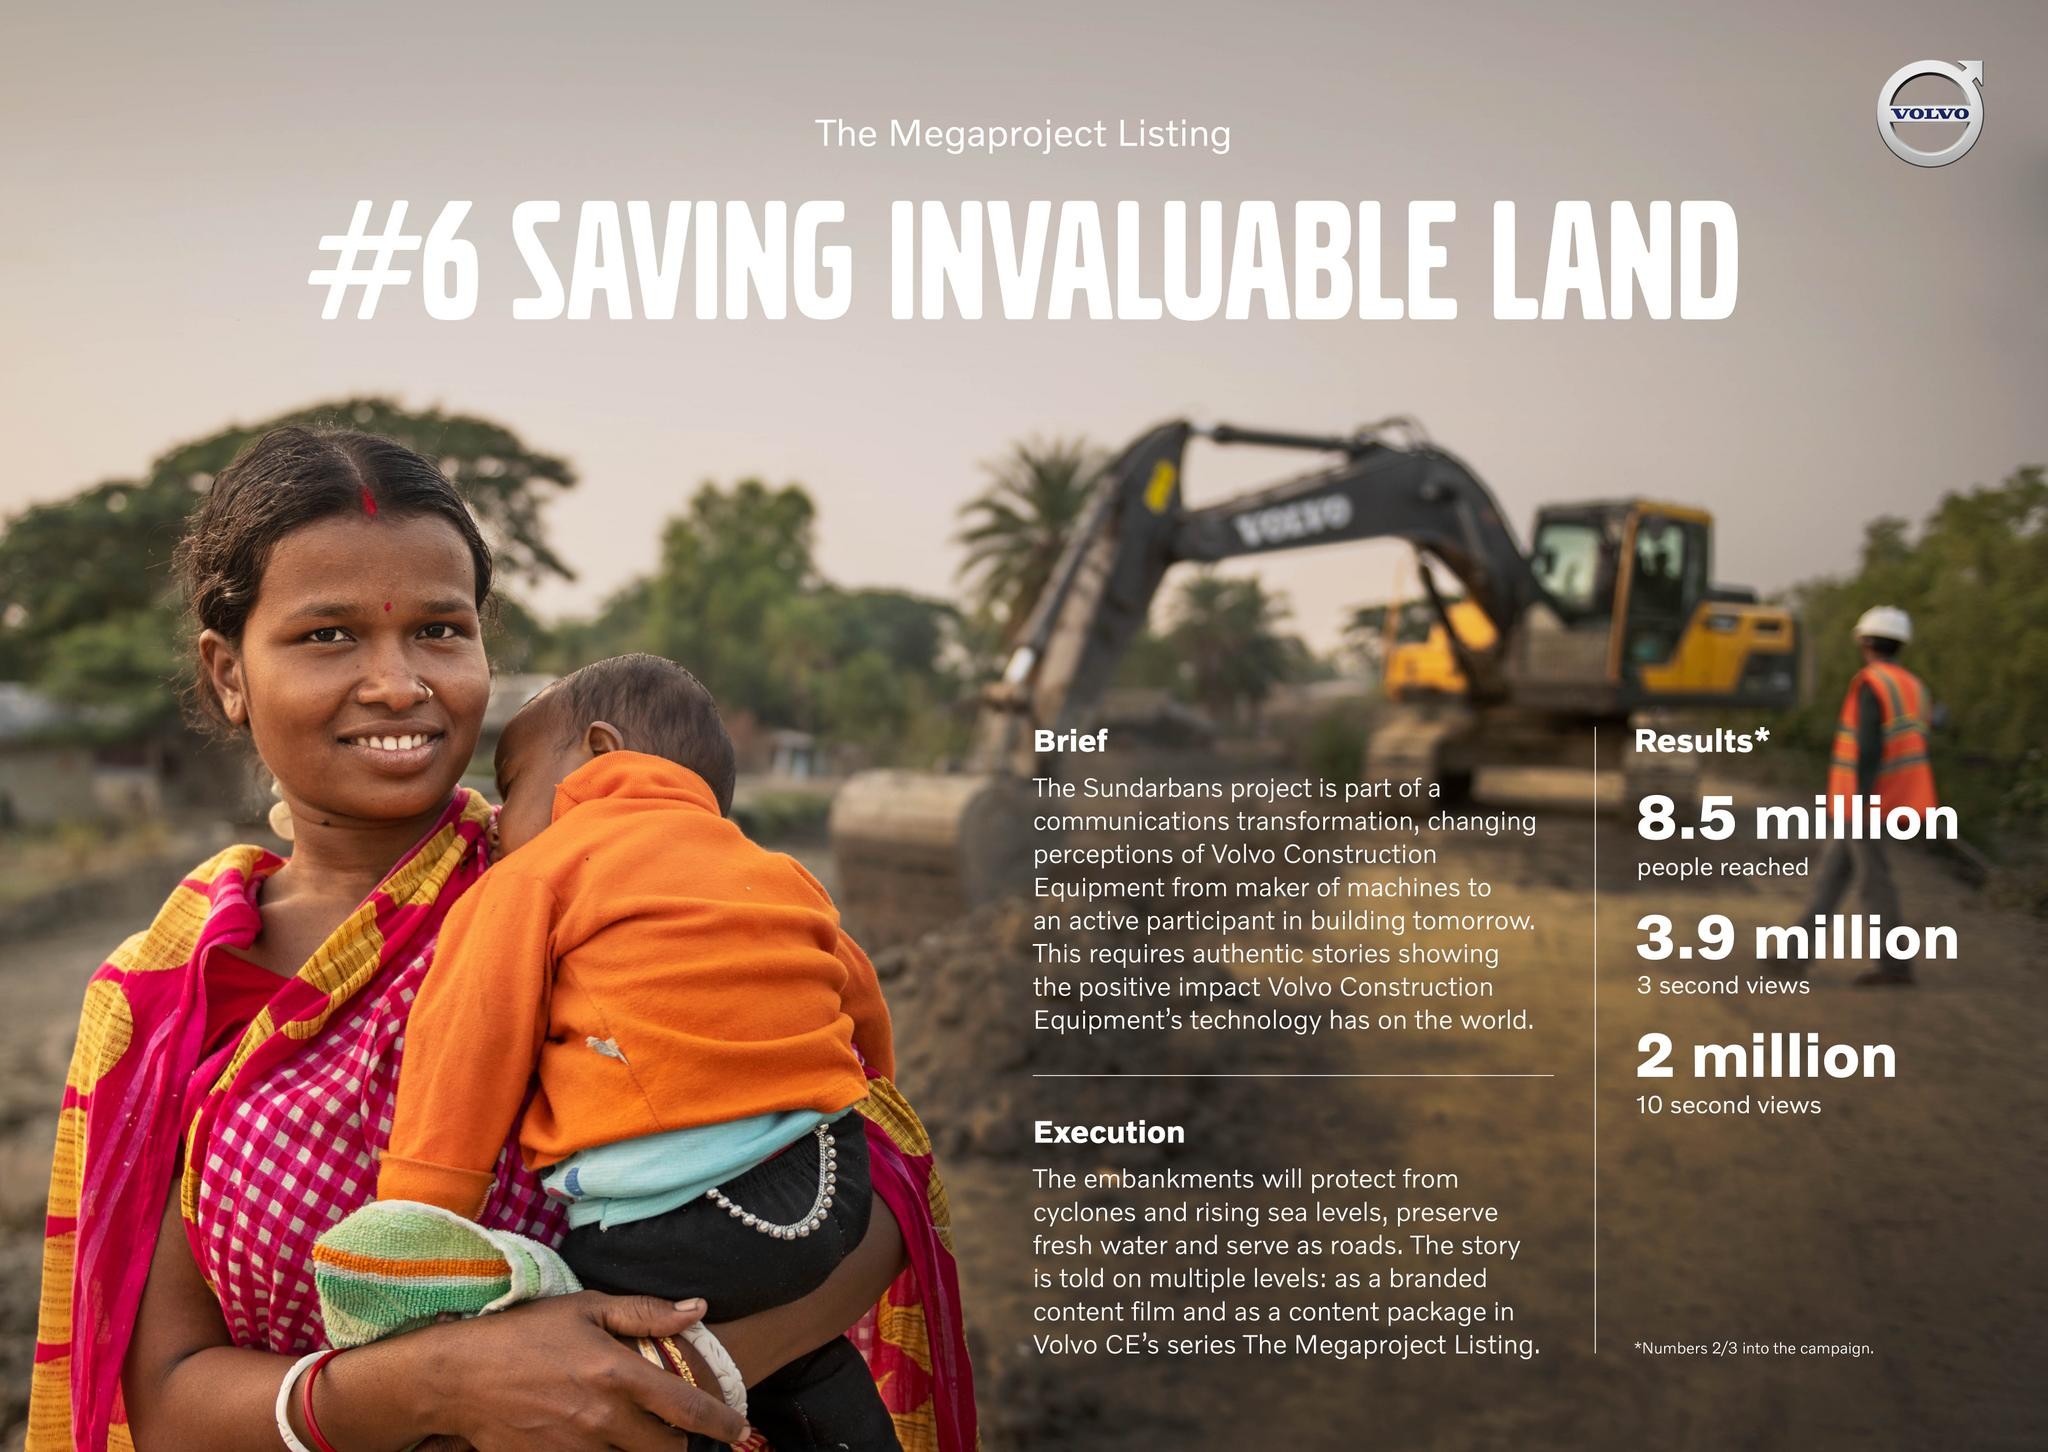 Saving Invaluable Land, The Megaproject Listing #6